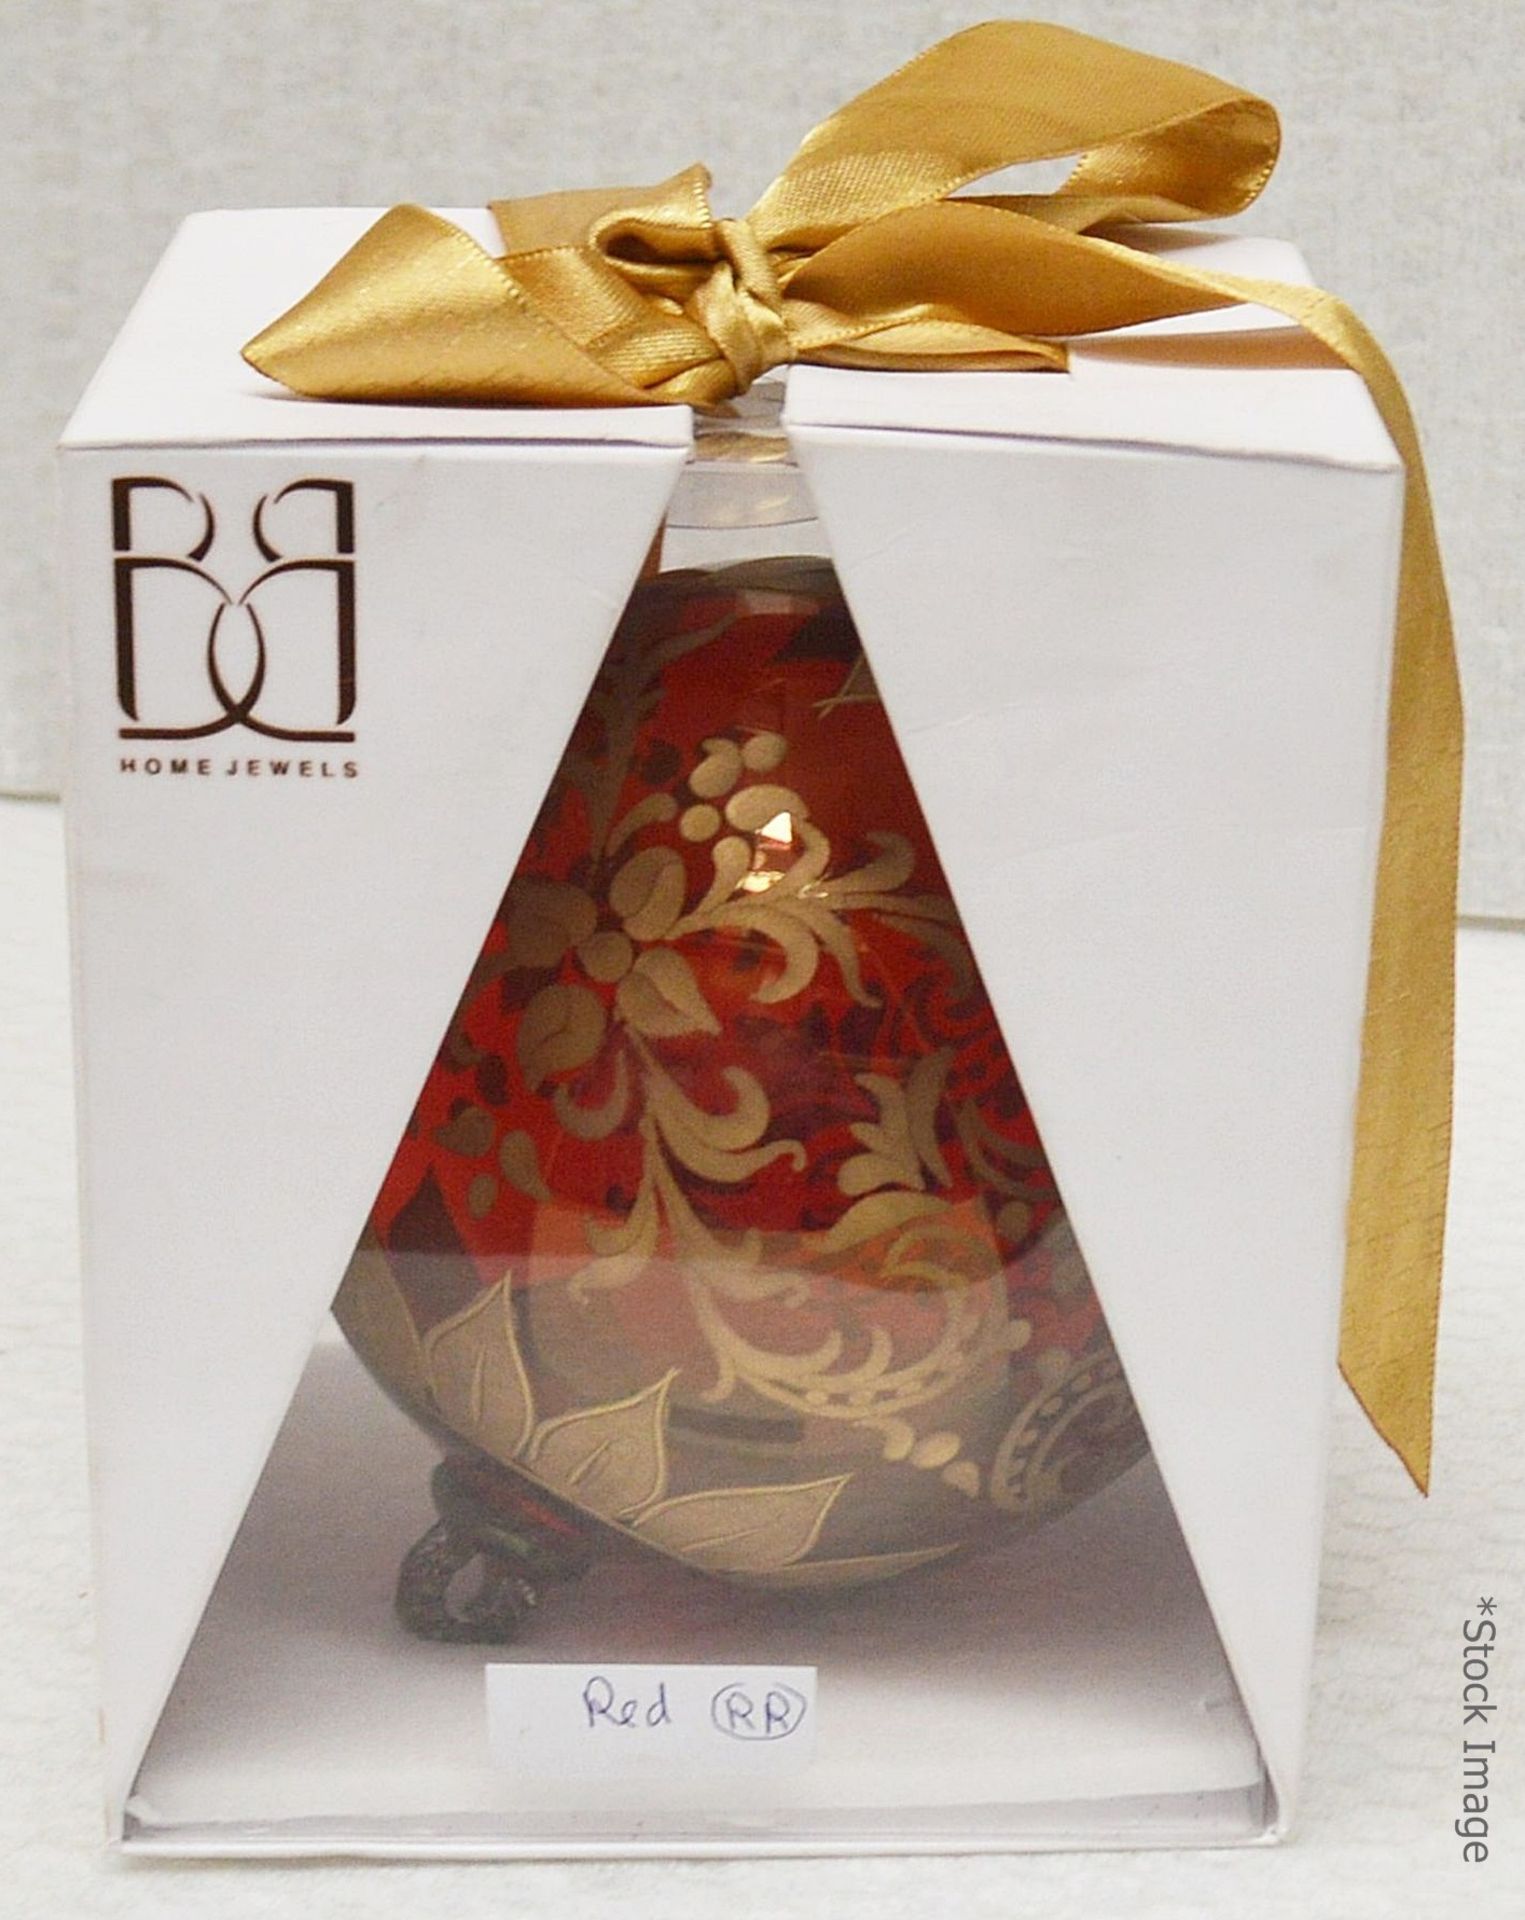 1 x BALDI 'Home Jewels' Italian Hand-crafted Artisan Glass Christmas Tree Decoration In Red With